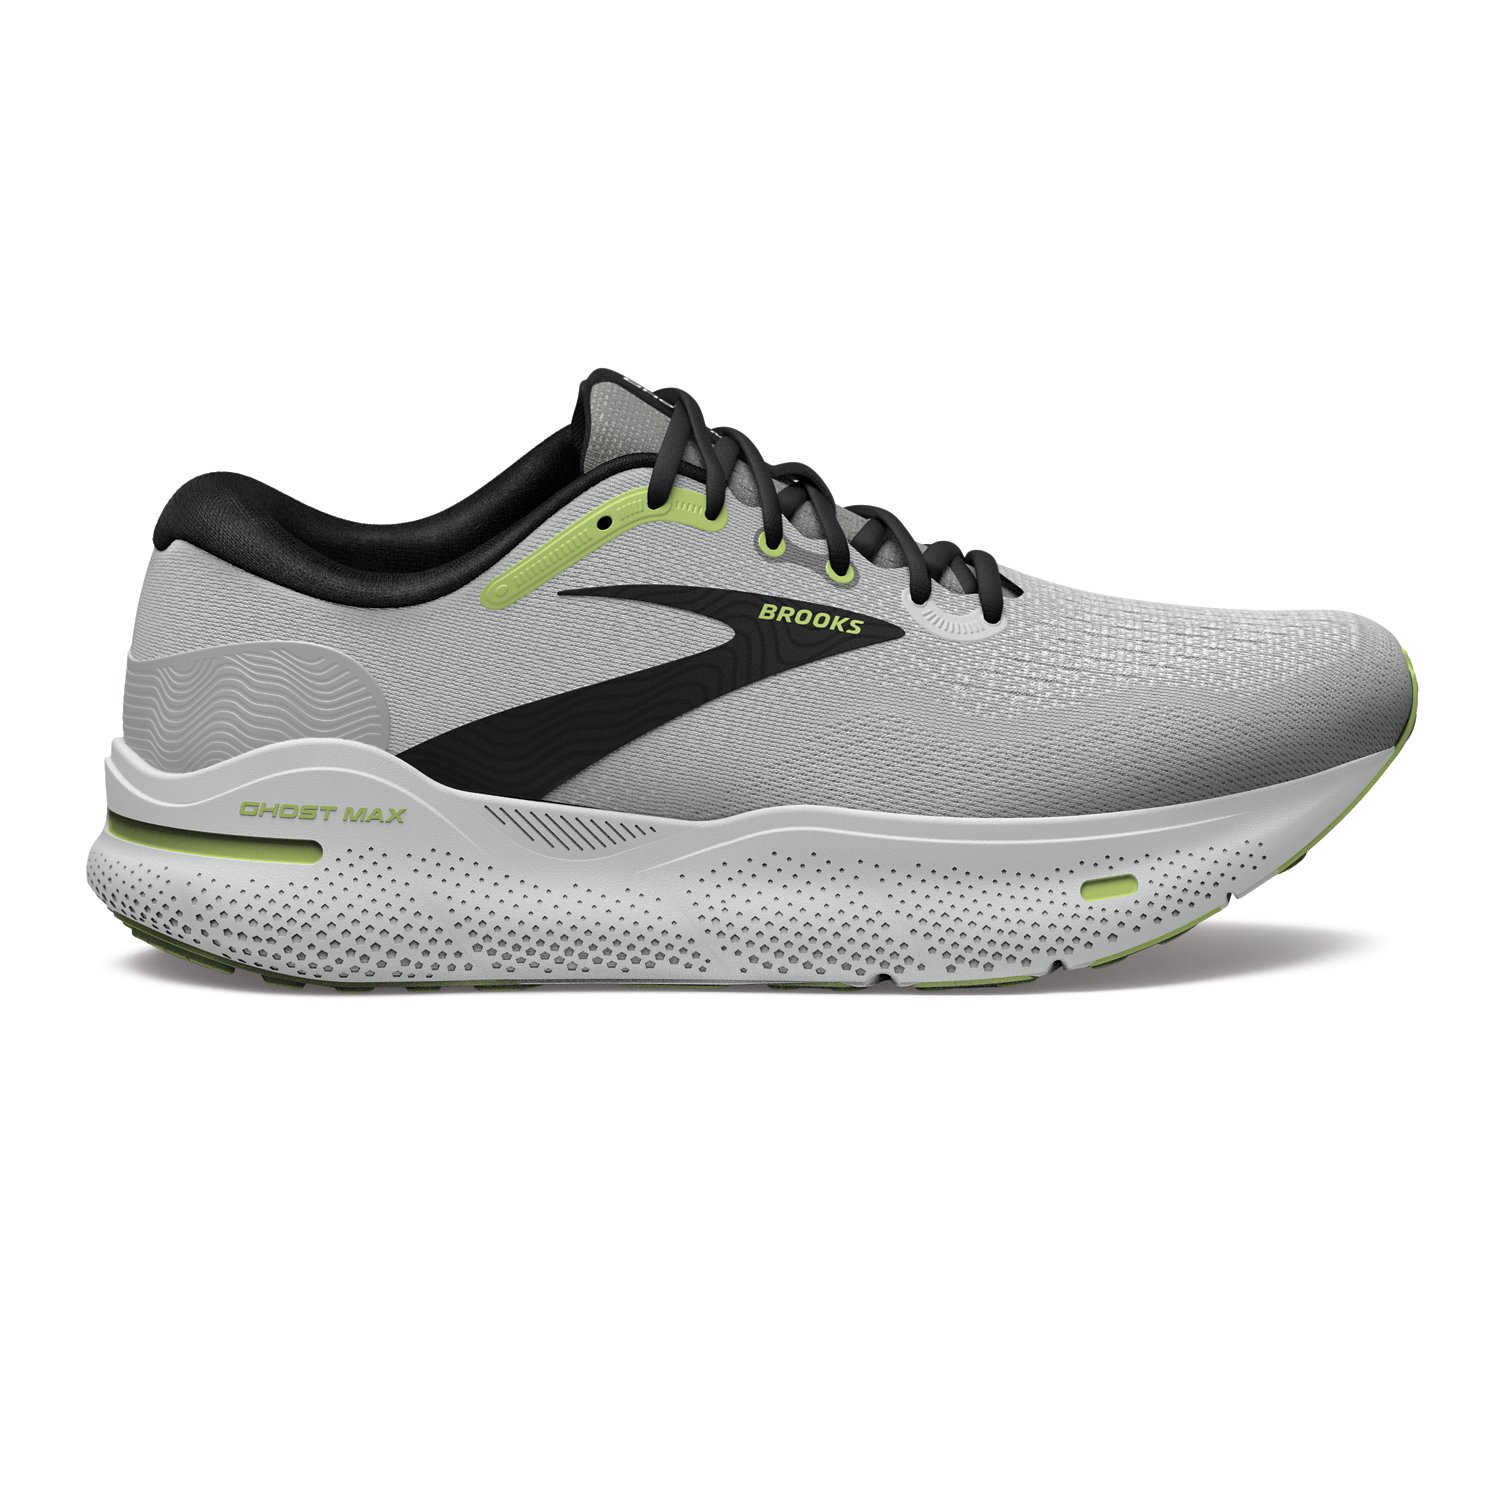 Brooks Mens Ghost Max Running Shoes